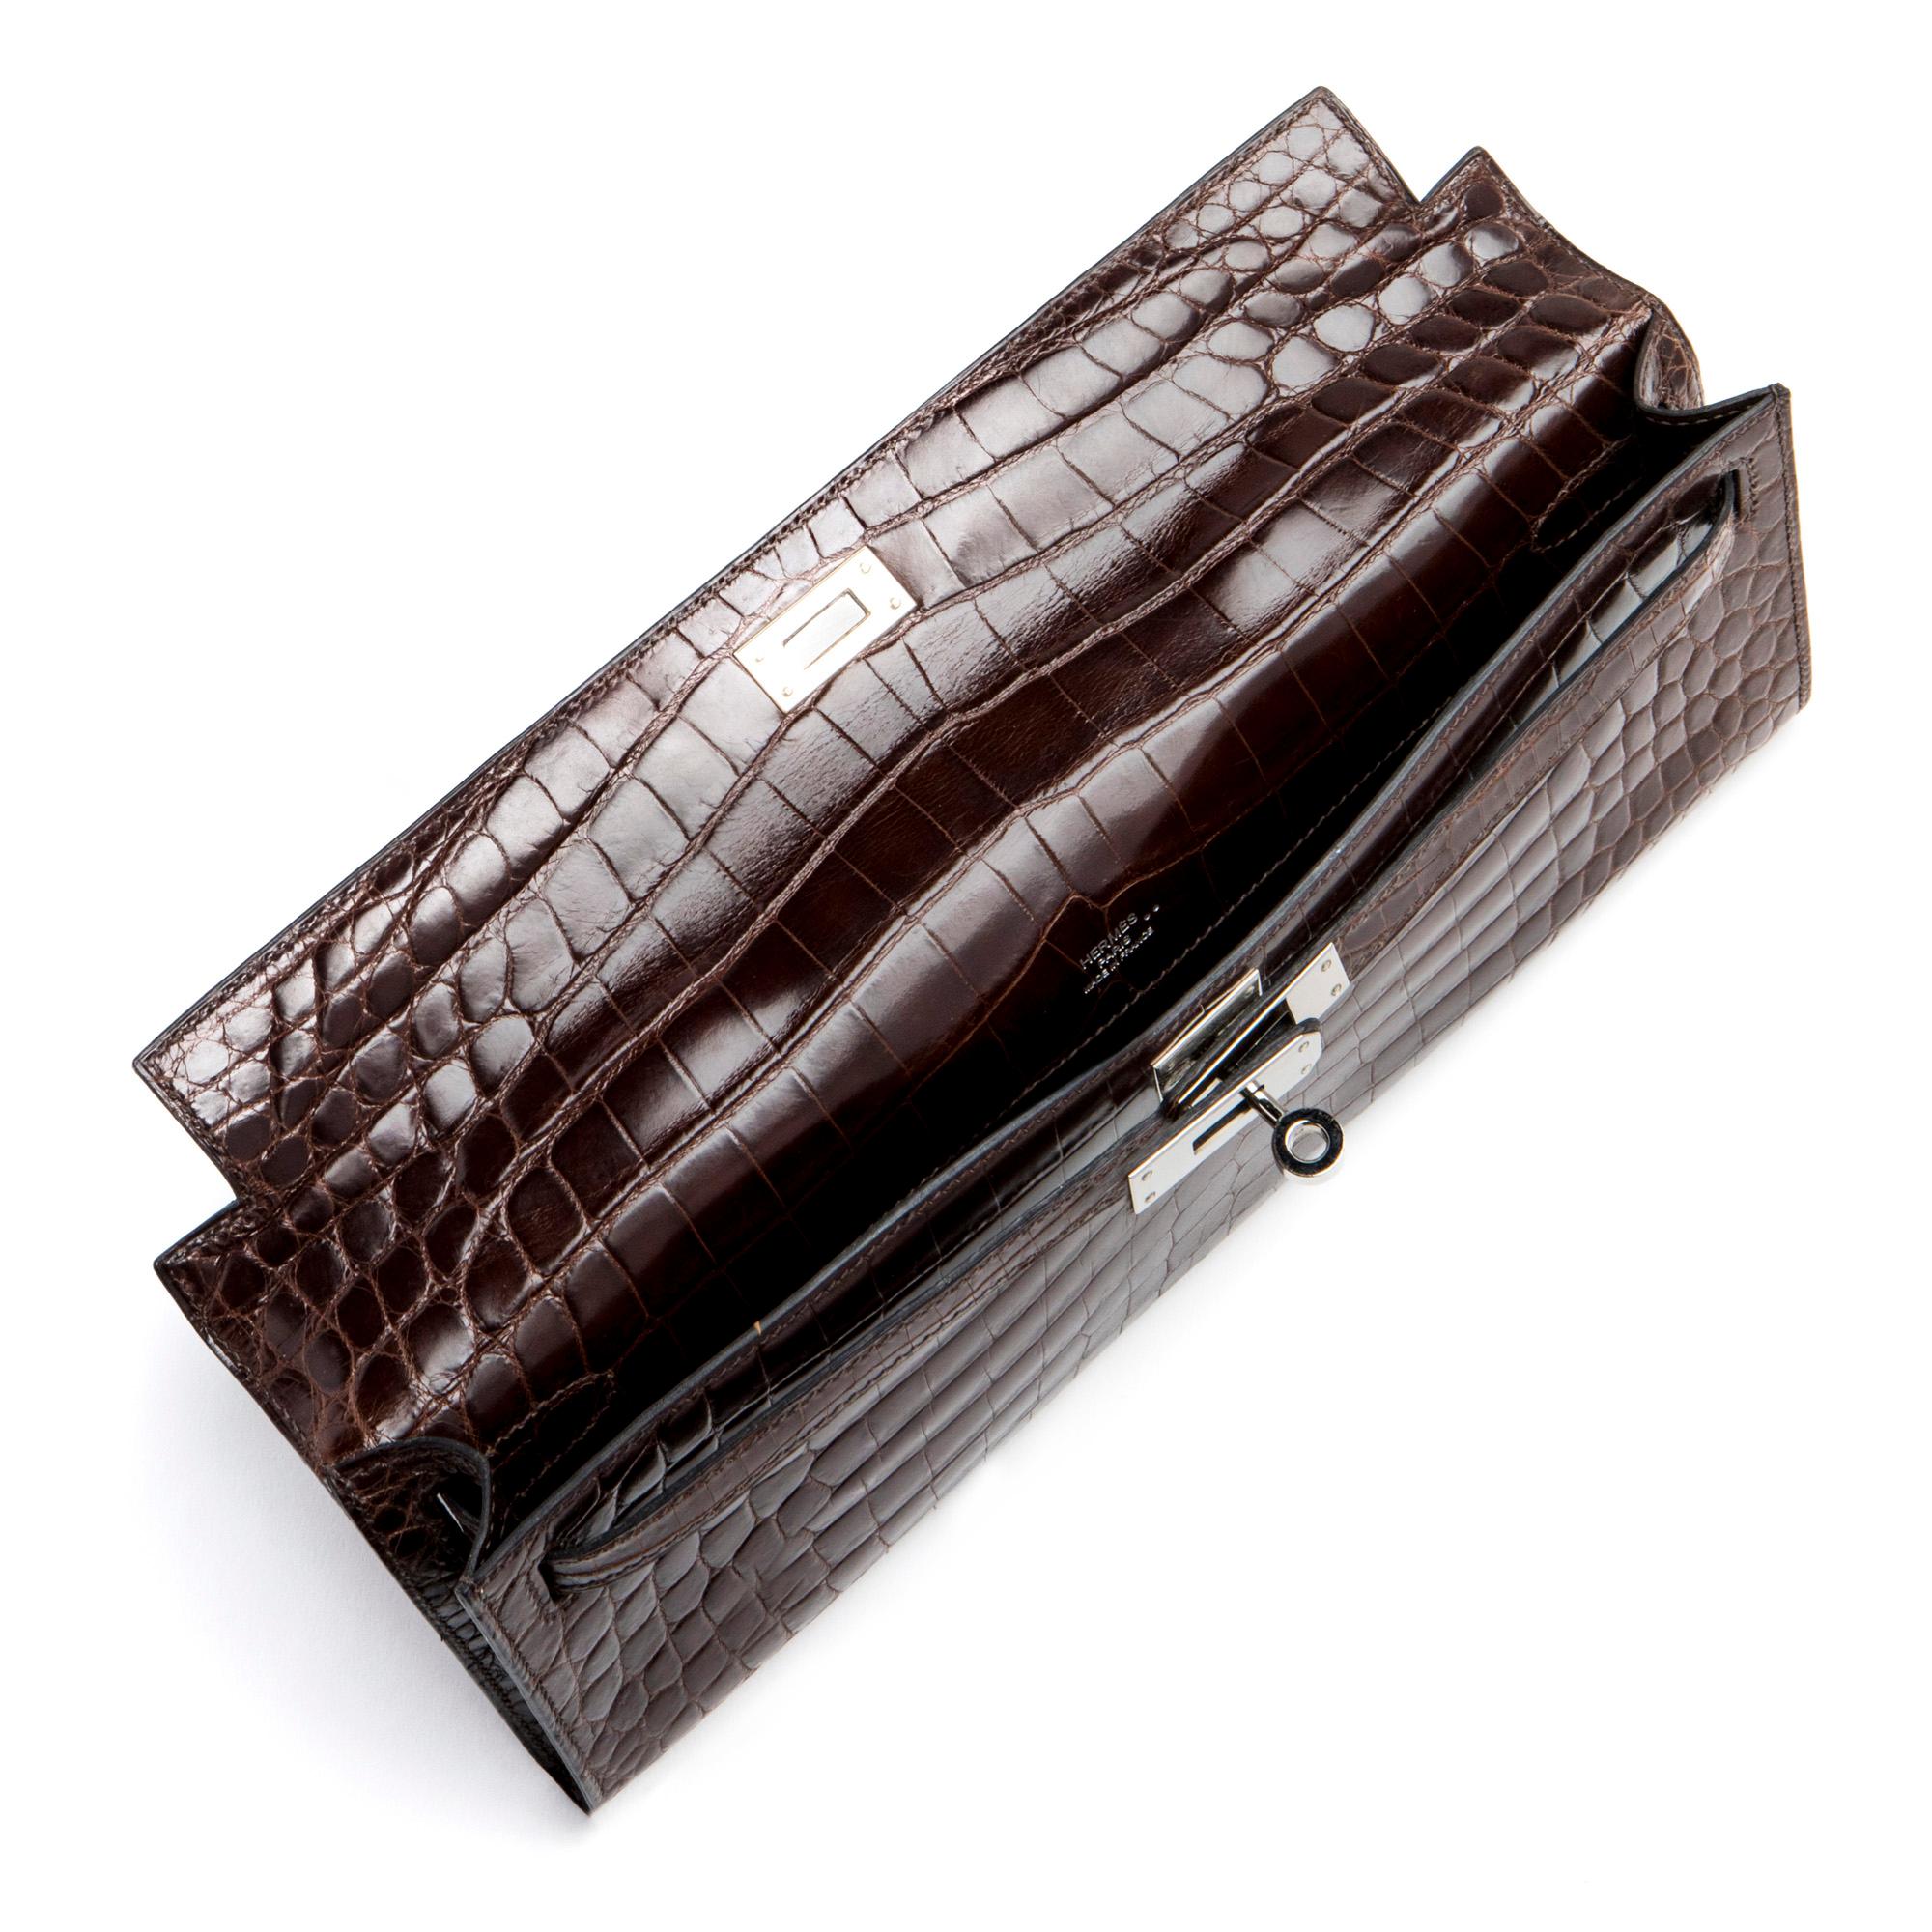 Hermés Makassar Porosus Crocodile Kelly Clutch In Excellent Condition For Sale In New York, NY